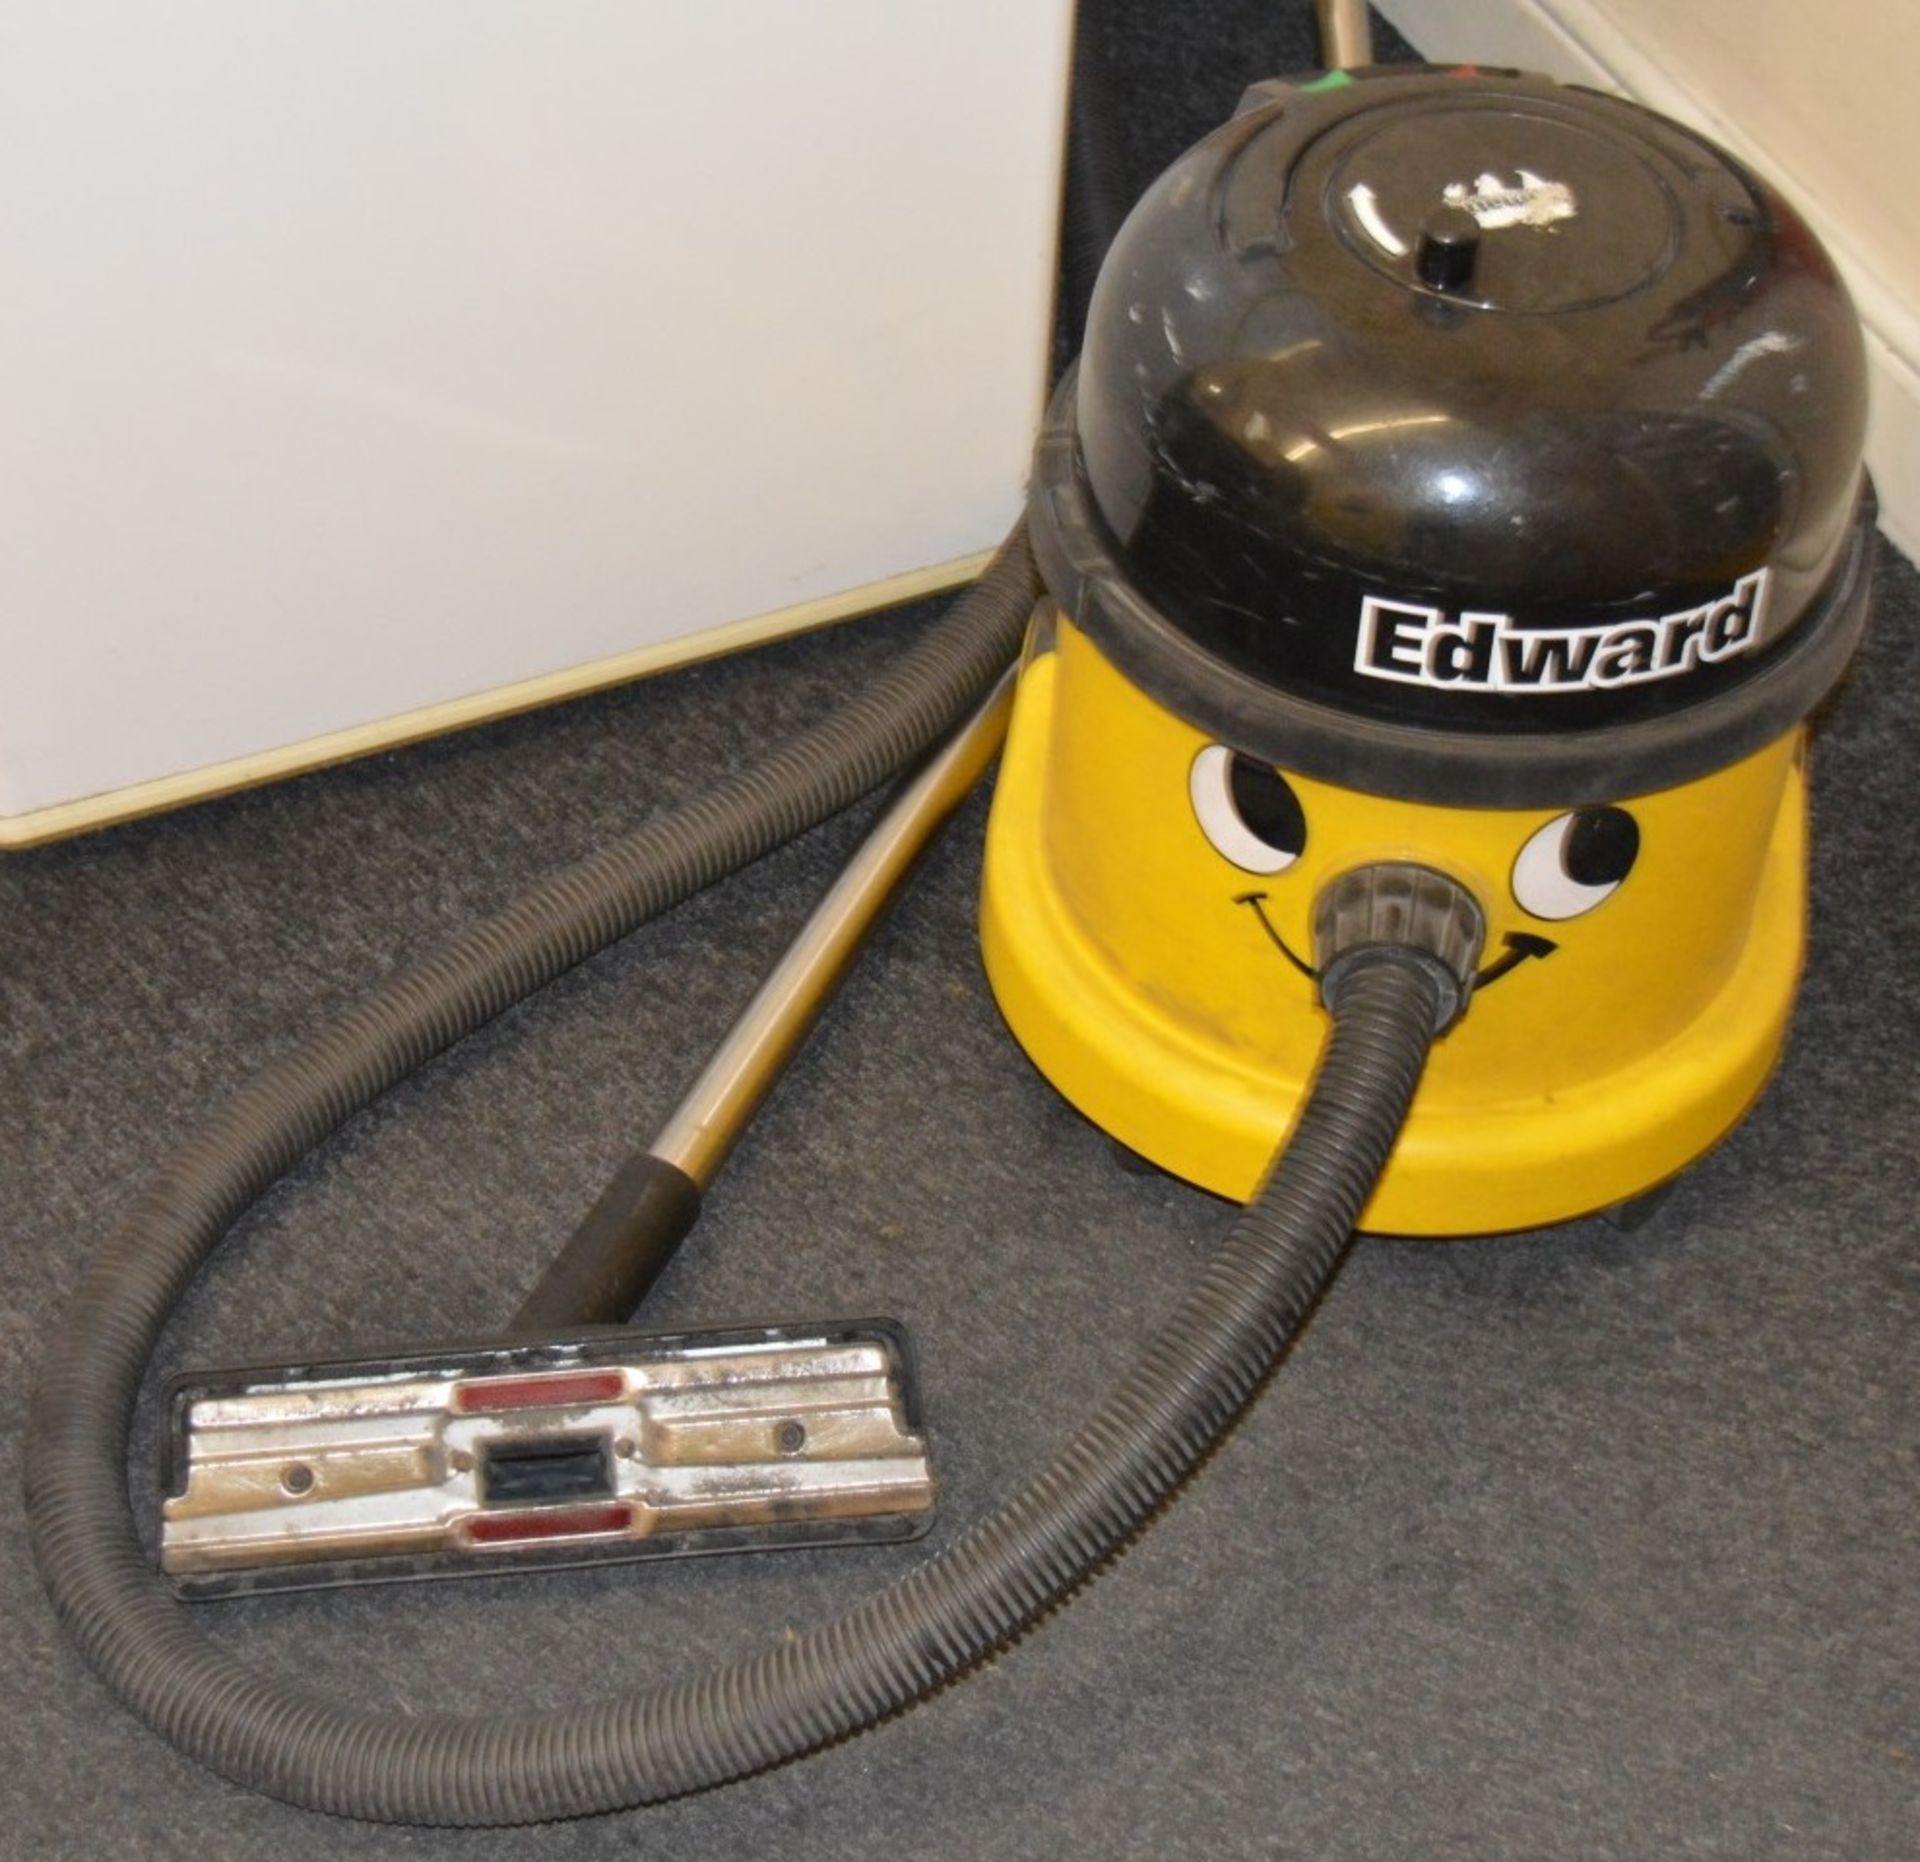 1 x Naumatic EDWARD Professional Hoover - Henrys Big Brother - Ideal For The Home or Office - 240v -